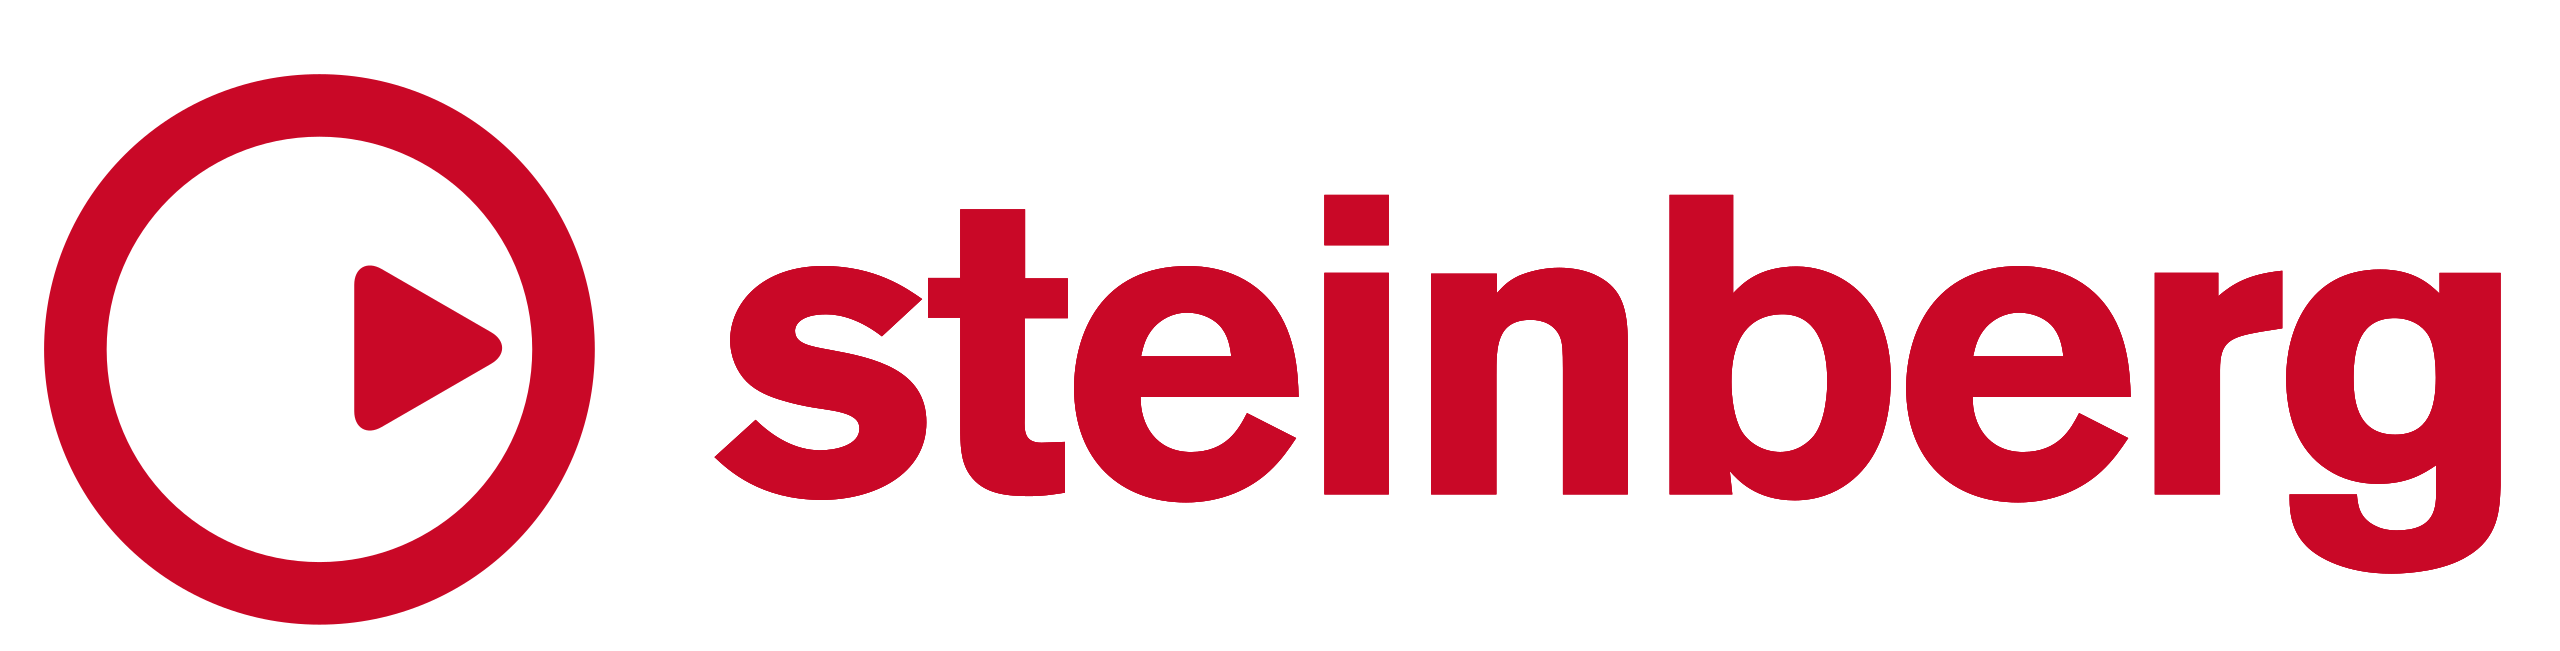 A picture of the Steinberg logo.